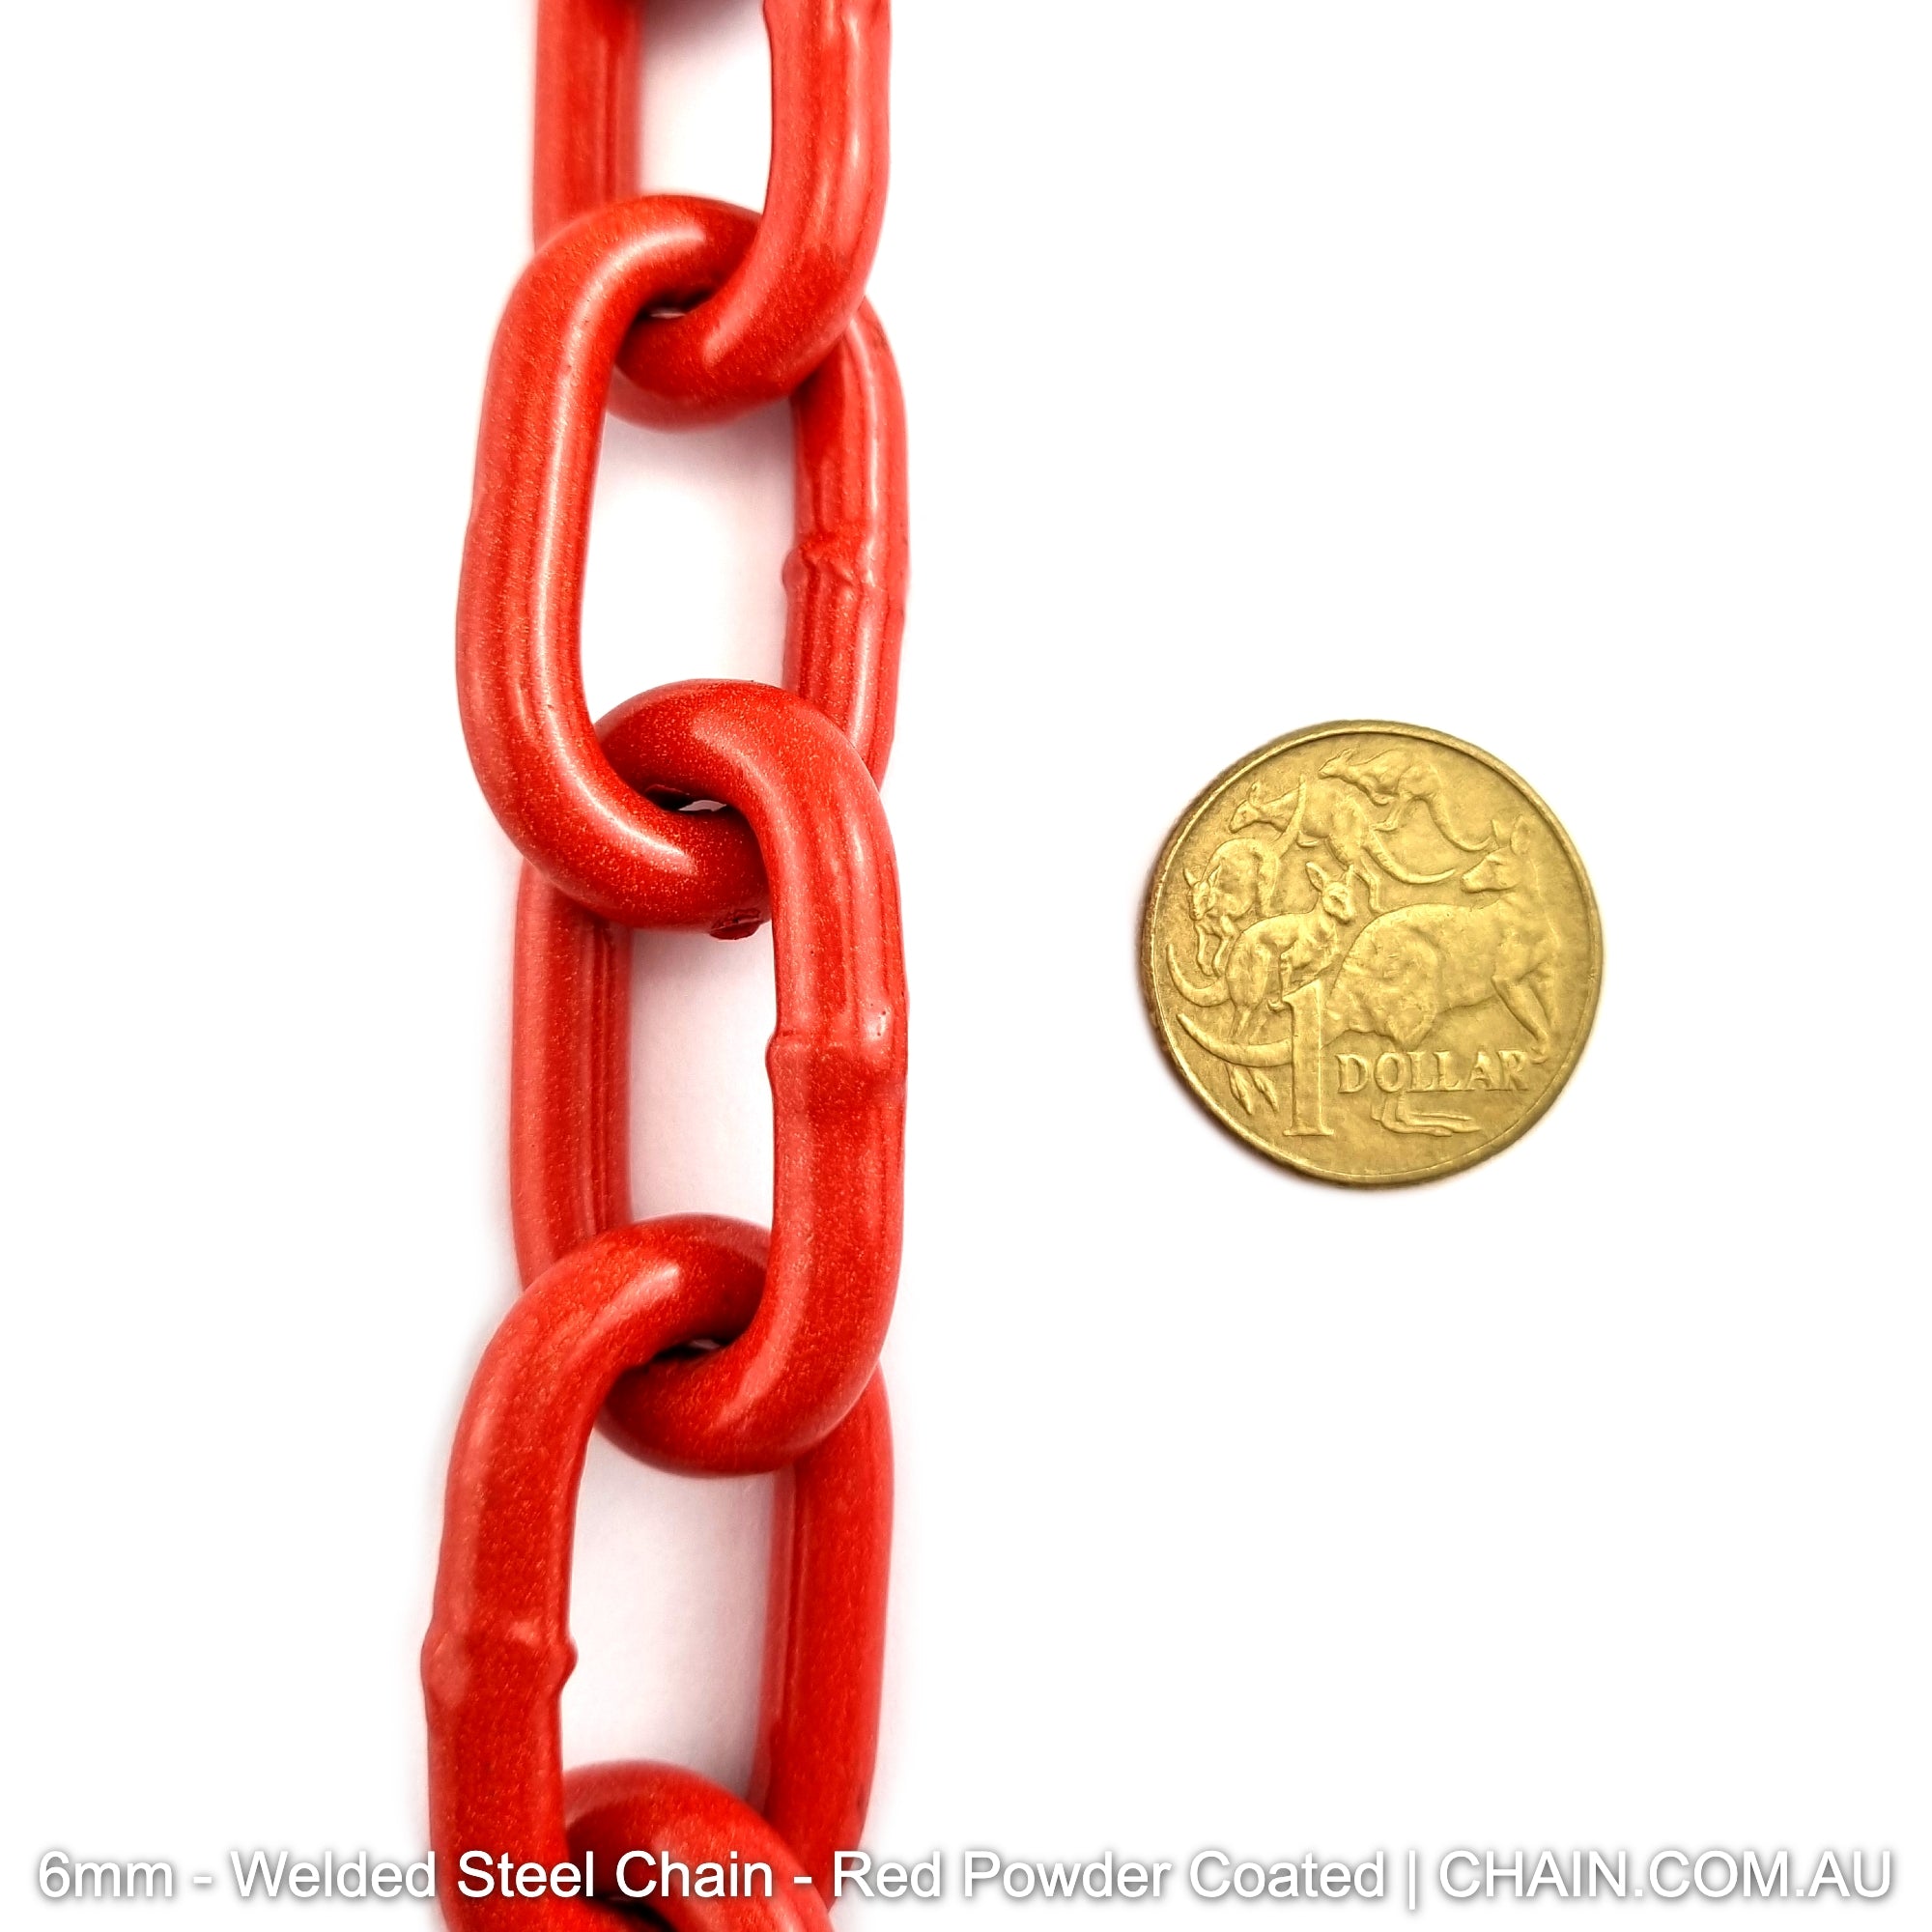 Welded Steel Chain - Red Powder Coated. Size: 6mm. Chain by the metre or bulk buy 25kg buckets. Shipping Australia wide. Shop online chain.com.au